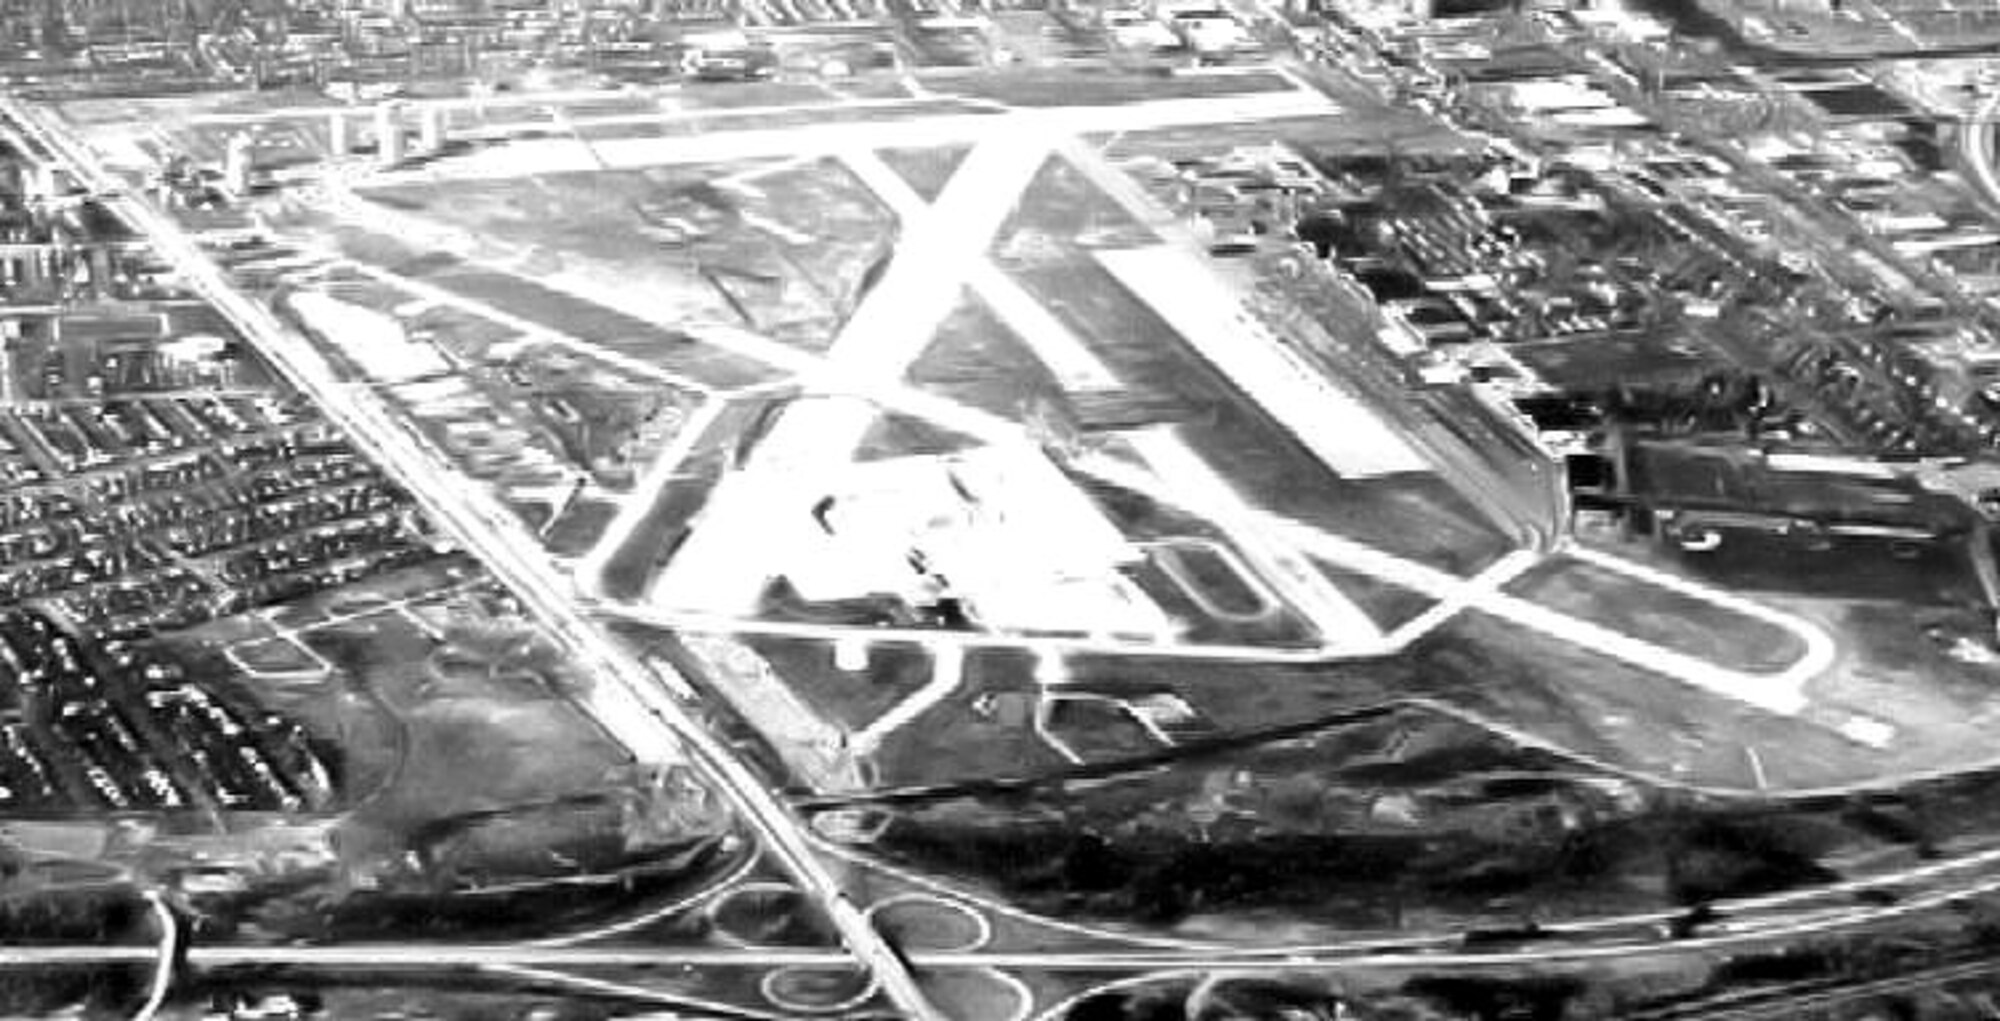 HOPD- Mitchel Field - New York - 1968. In late September 1942, the 348th Fighter Group, consisting of the 340th, 341st and 342nd Fighter Squadrons was activated at Mitchel Field, Long Island, NY; located on the Hempstead Plains, today it is the home of the Cradle of Aviation Museum. (108th Wing provides access to this public domain photo available at Wikipedia from the United States Department of Agriculture)